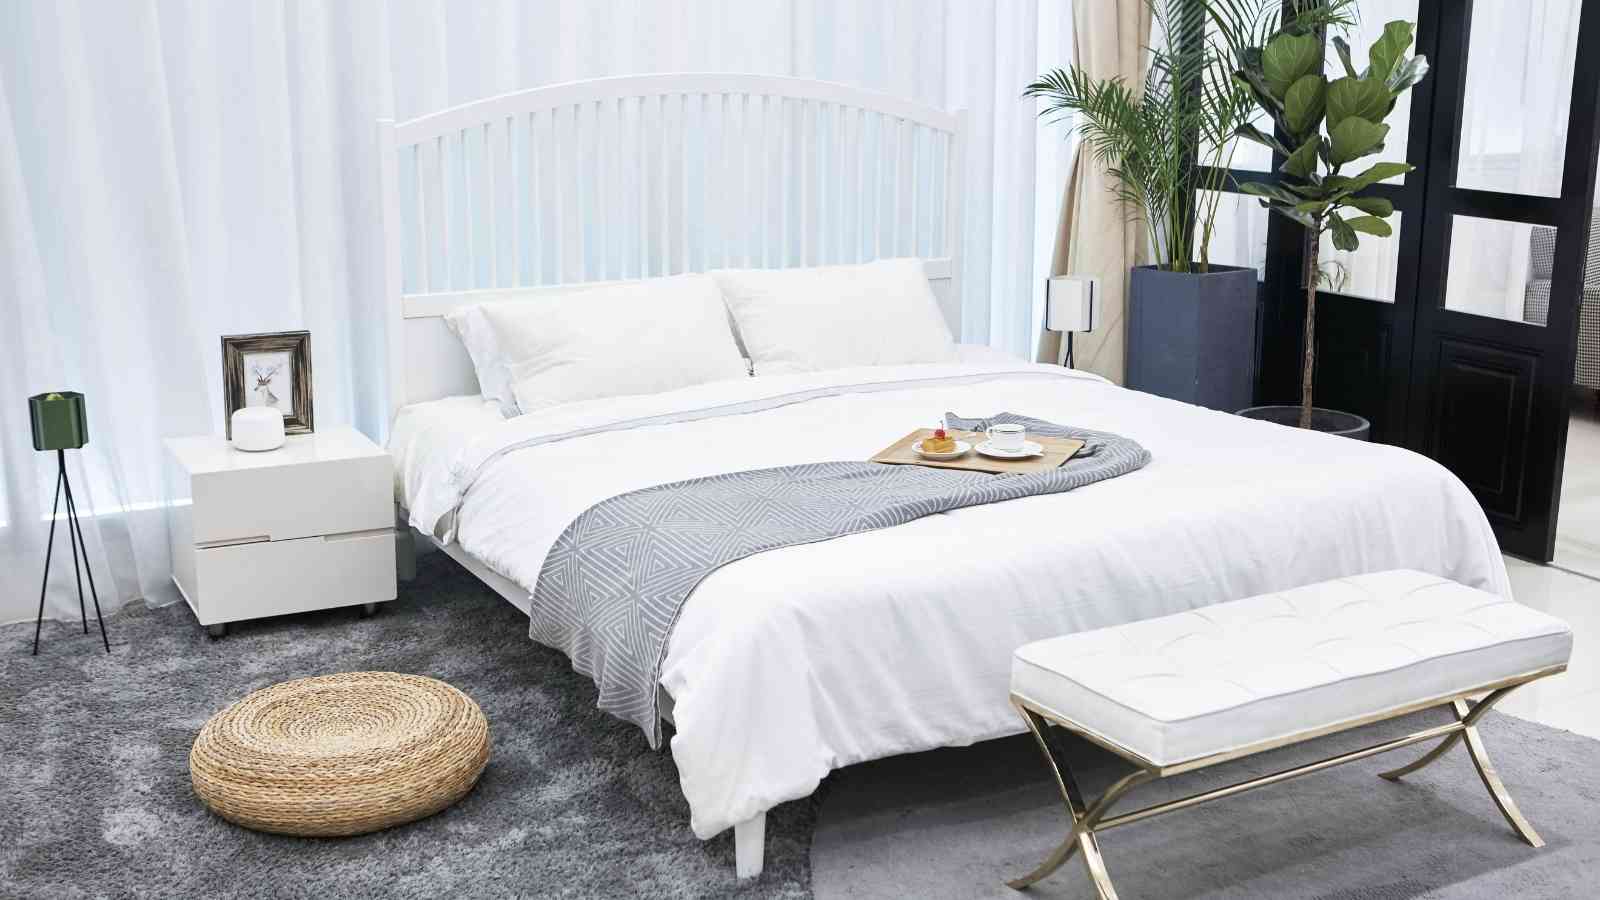 Make Your Bedroom More Stylish